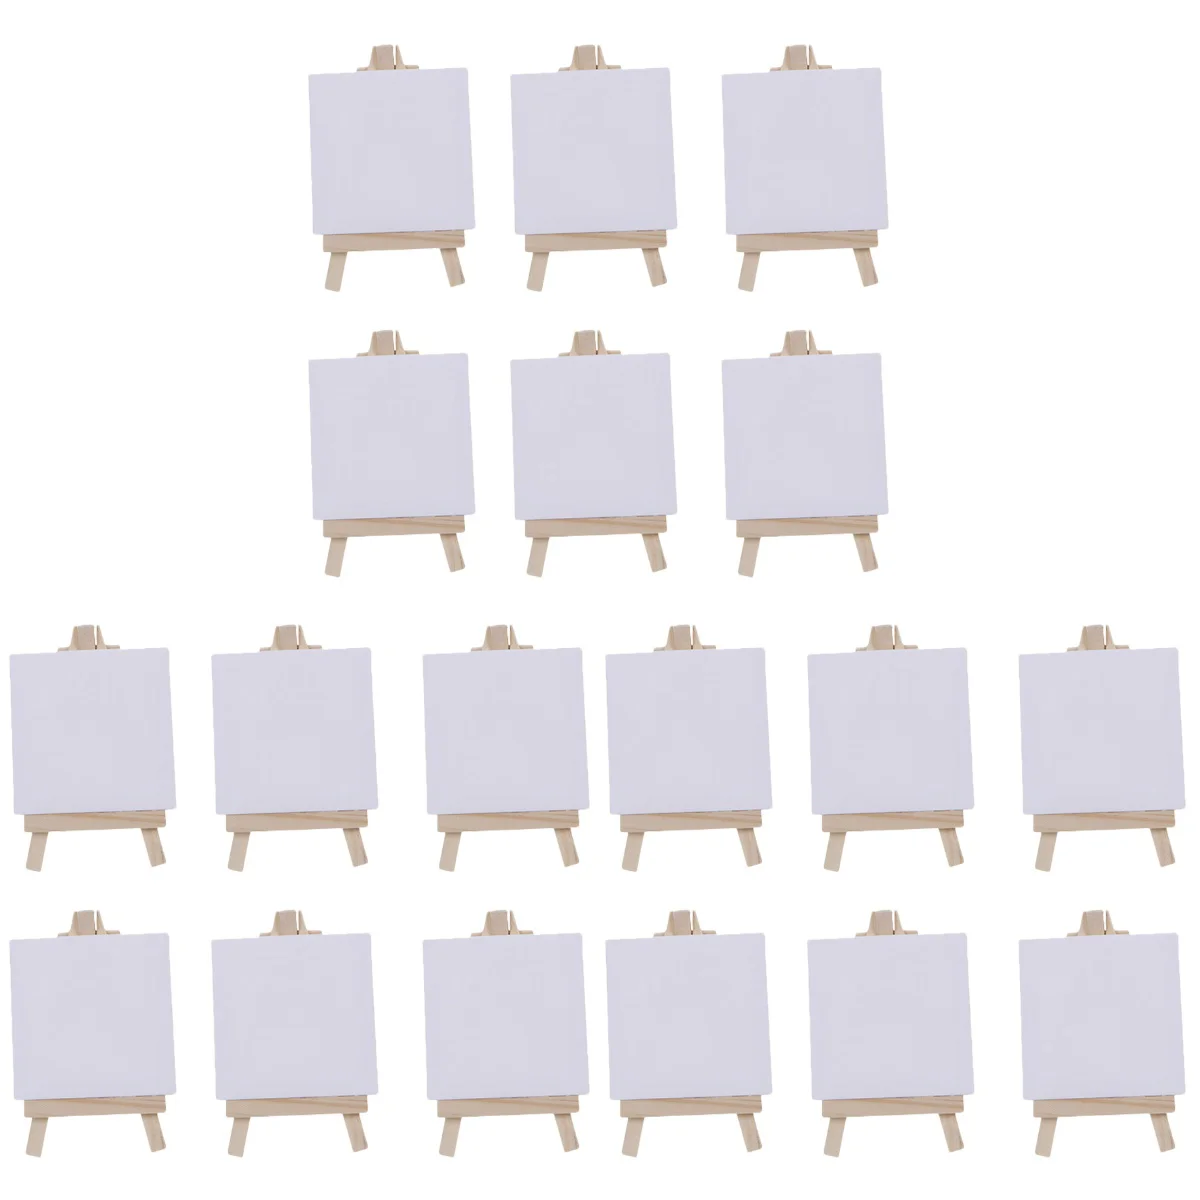 18 Sets of Mini Stretched Artist Canvas Board White Blank Boards Wooden Oil Paint Artwork painting Board(White) newborn photography props mini drawing board and paintbrush baby hats the painter cap artist theme accessories studio props